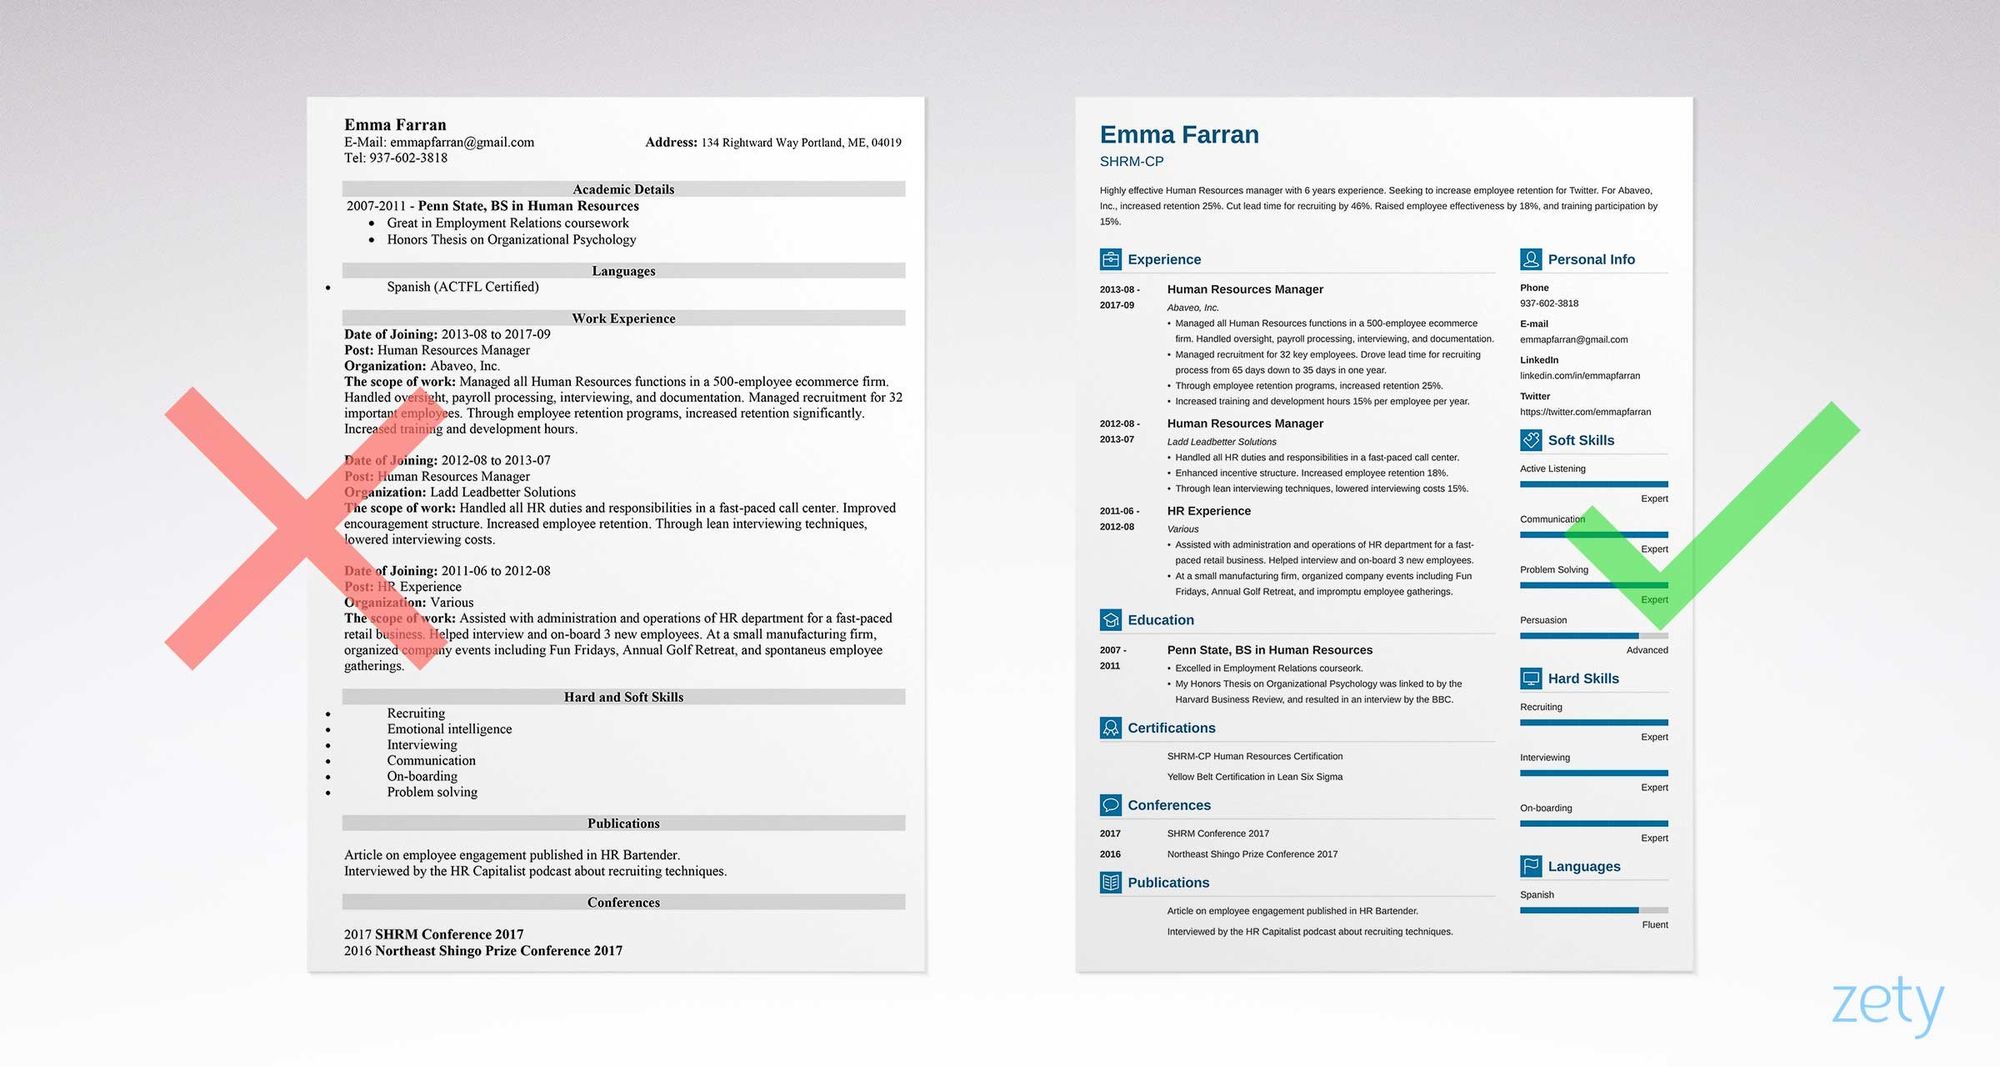 Most creative resumes we have ever seen